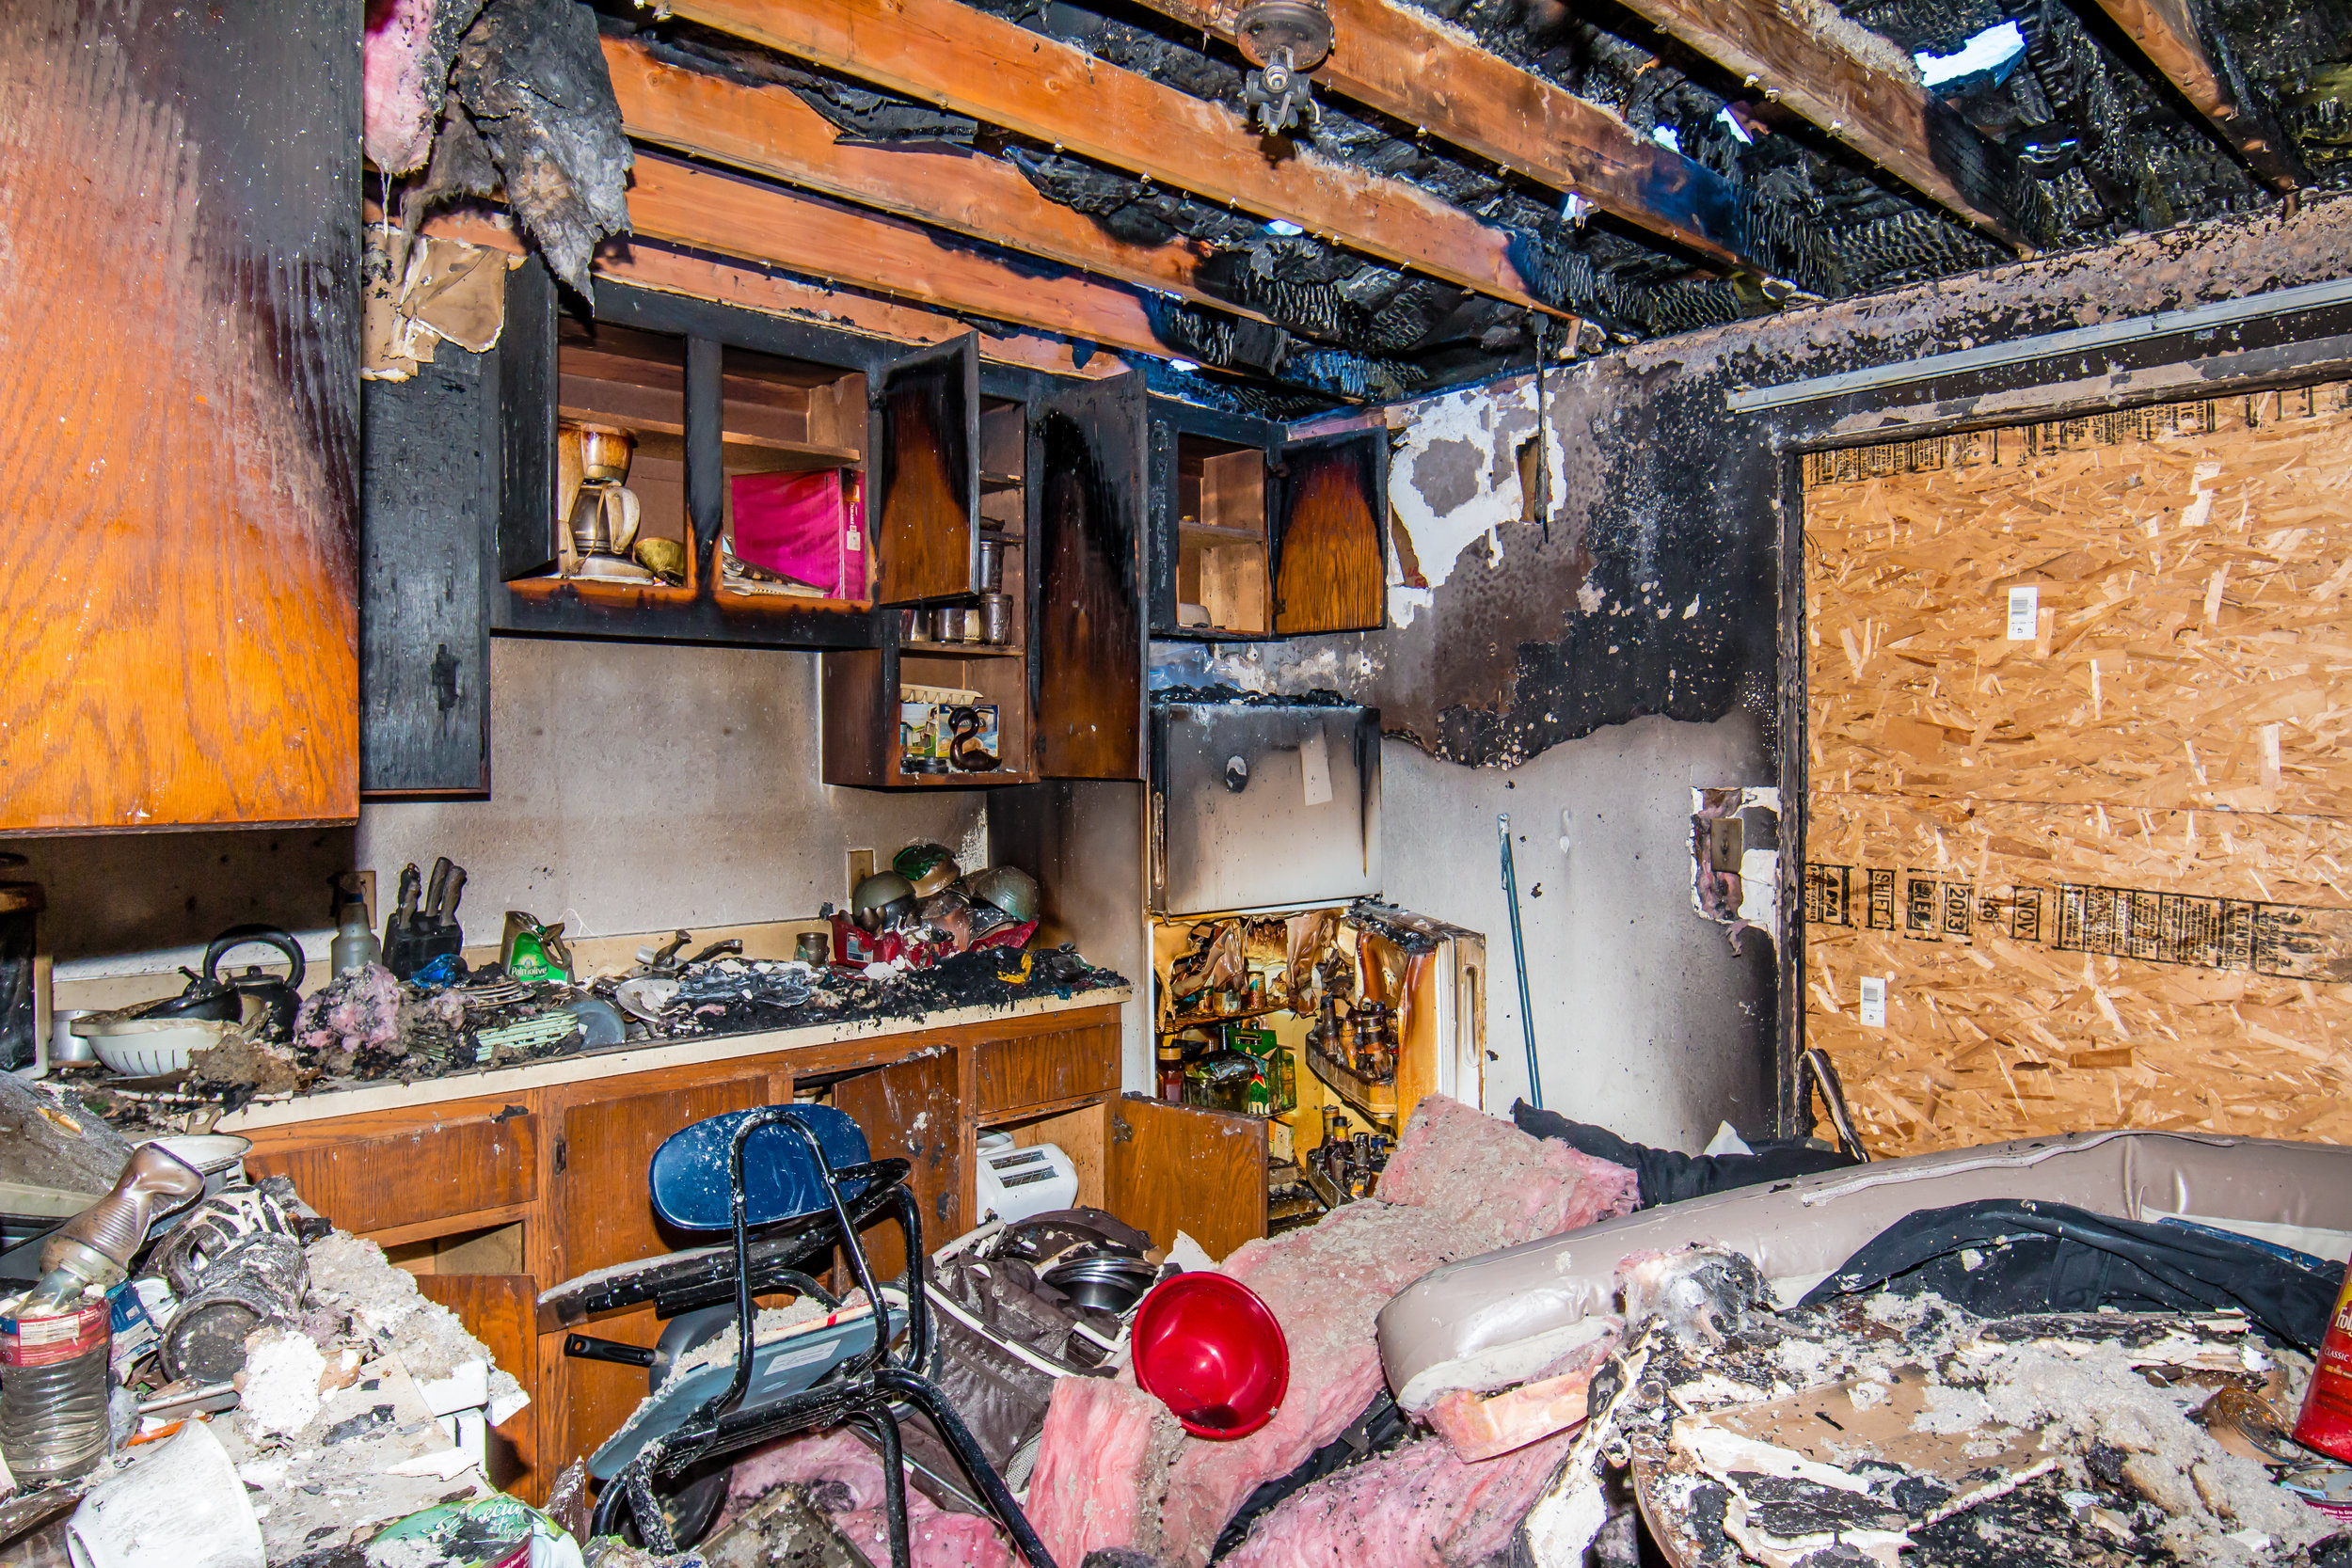   Fire Damage Restoration Services   Because Restoring Your Property Deserves Extraordinary Care   CALL 253-797-6447  